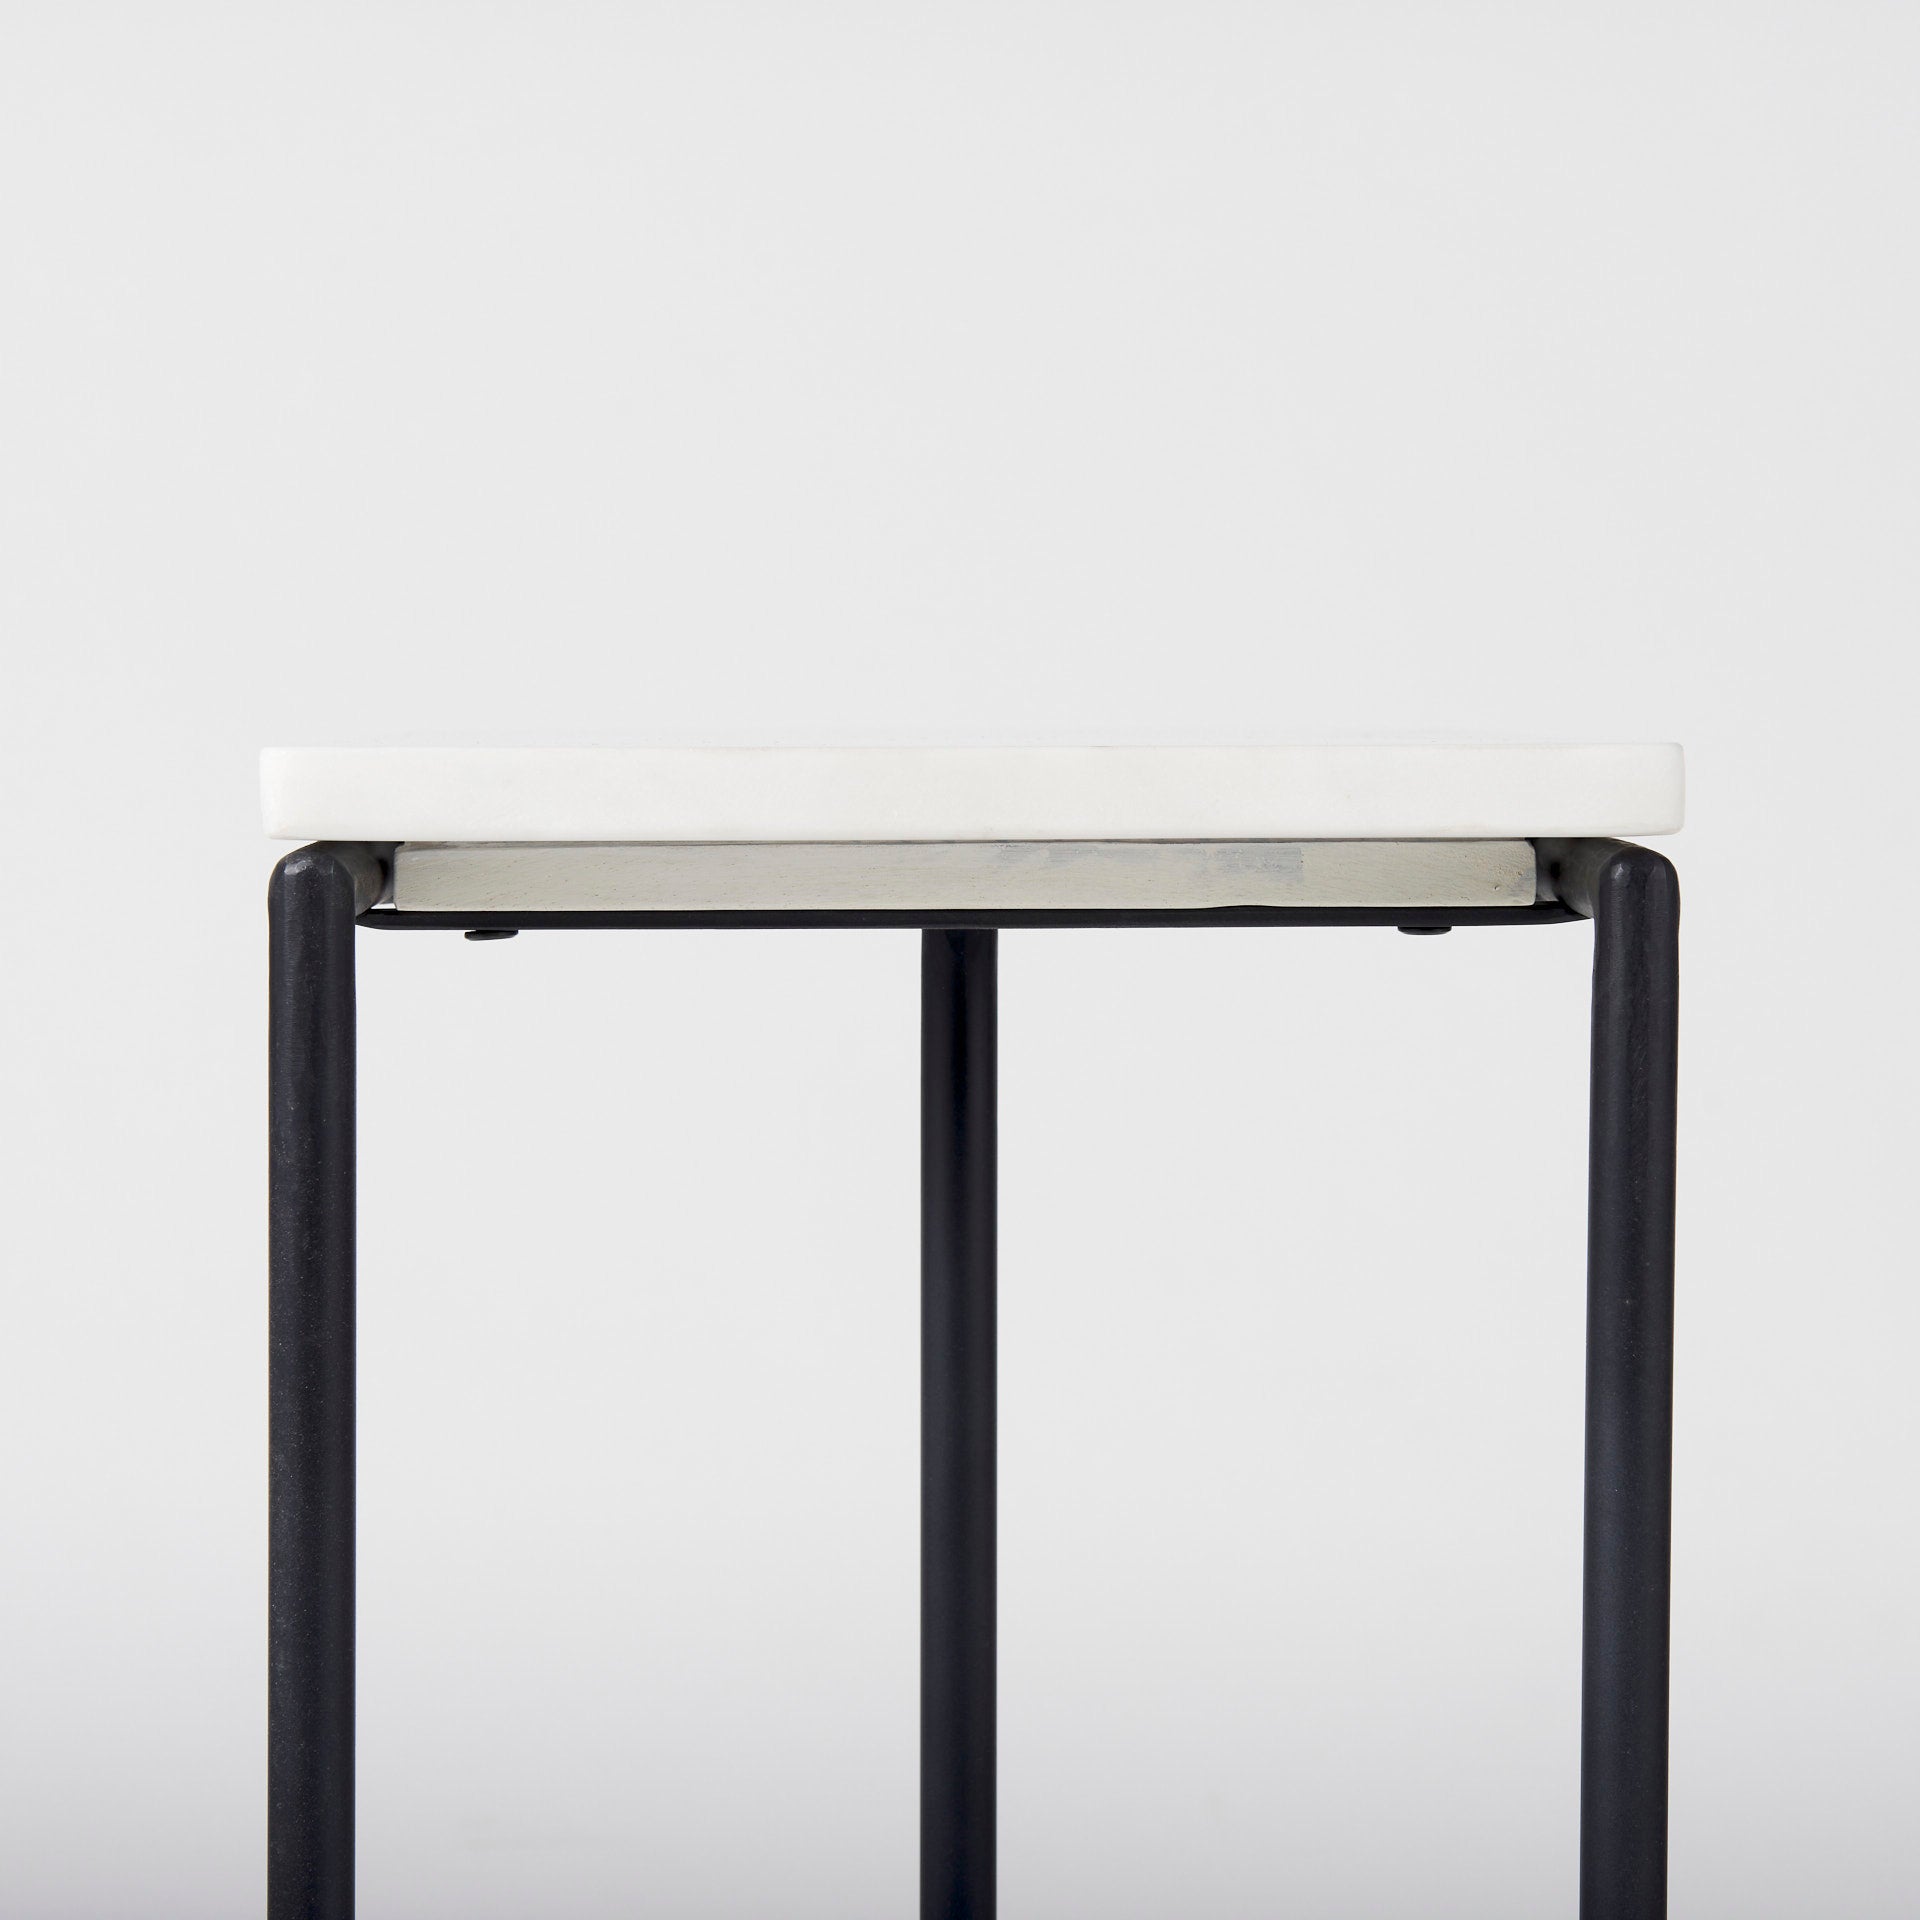 Kyra Accent Table